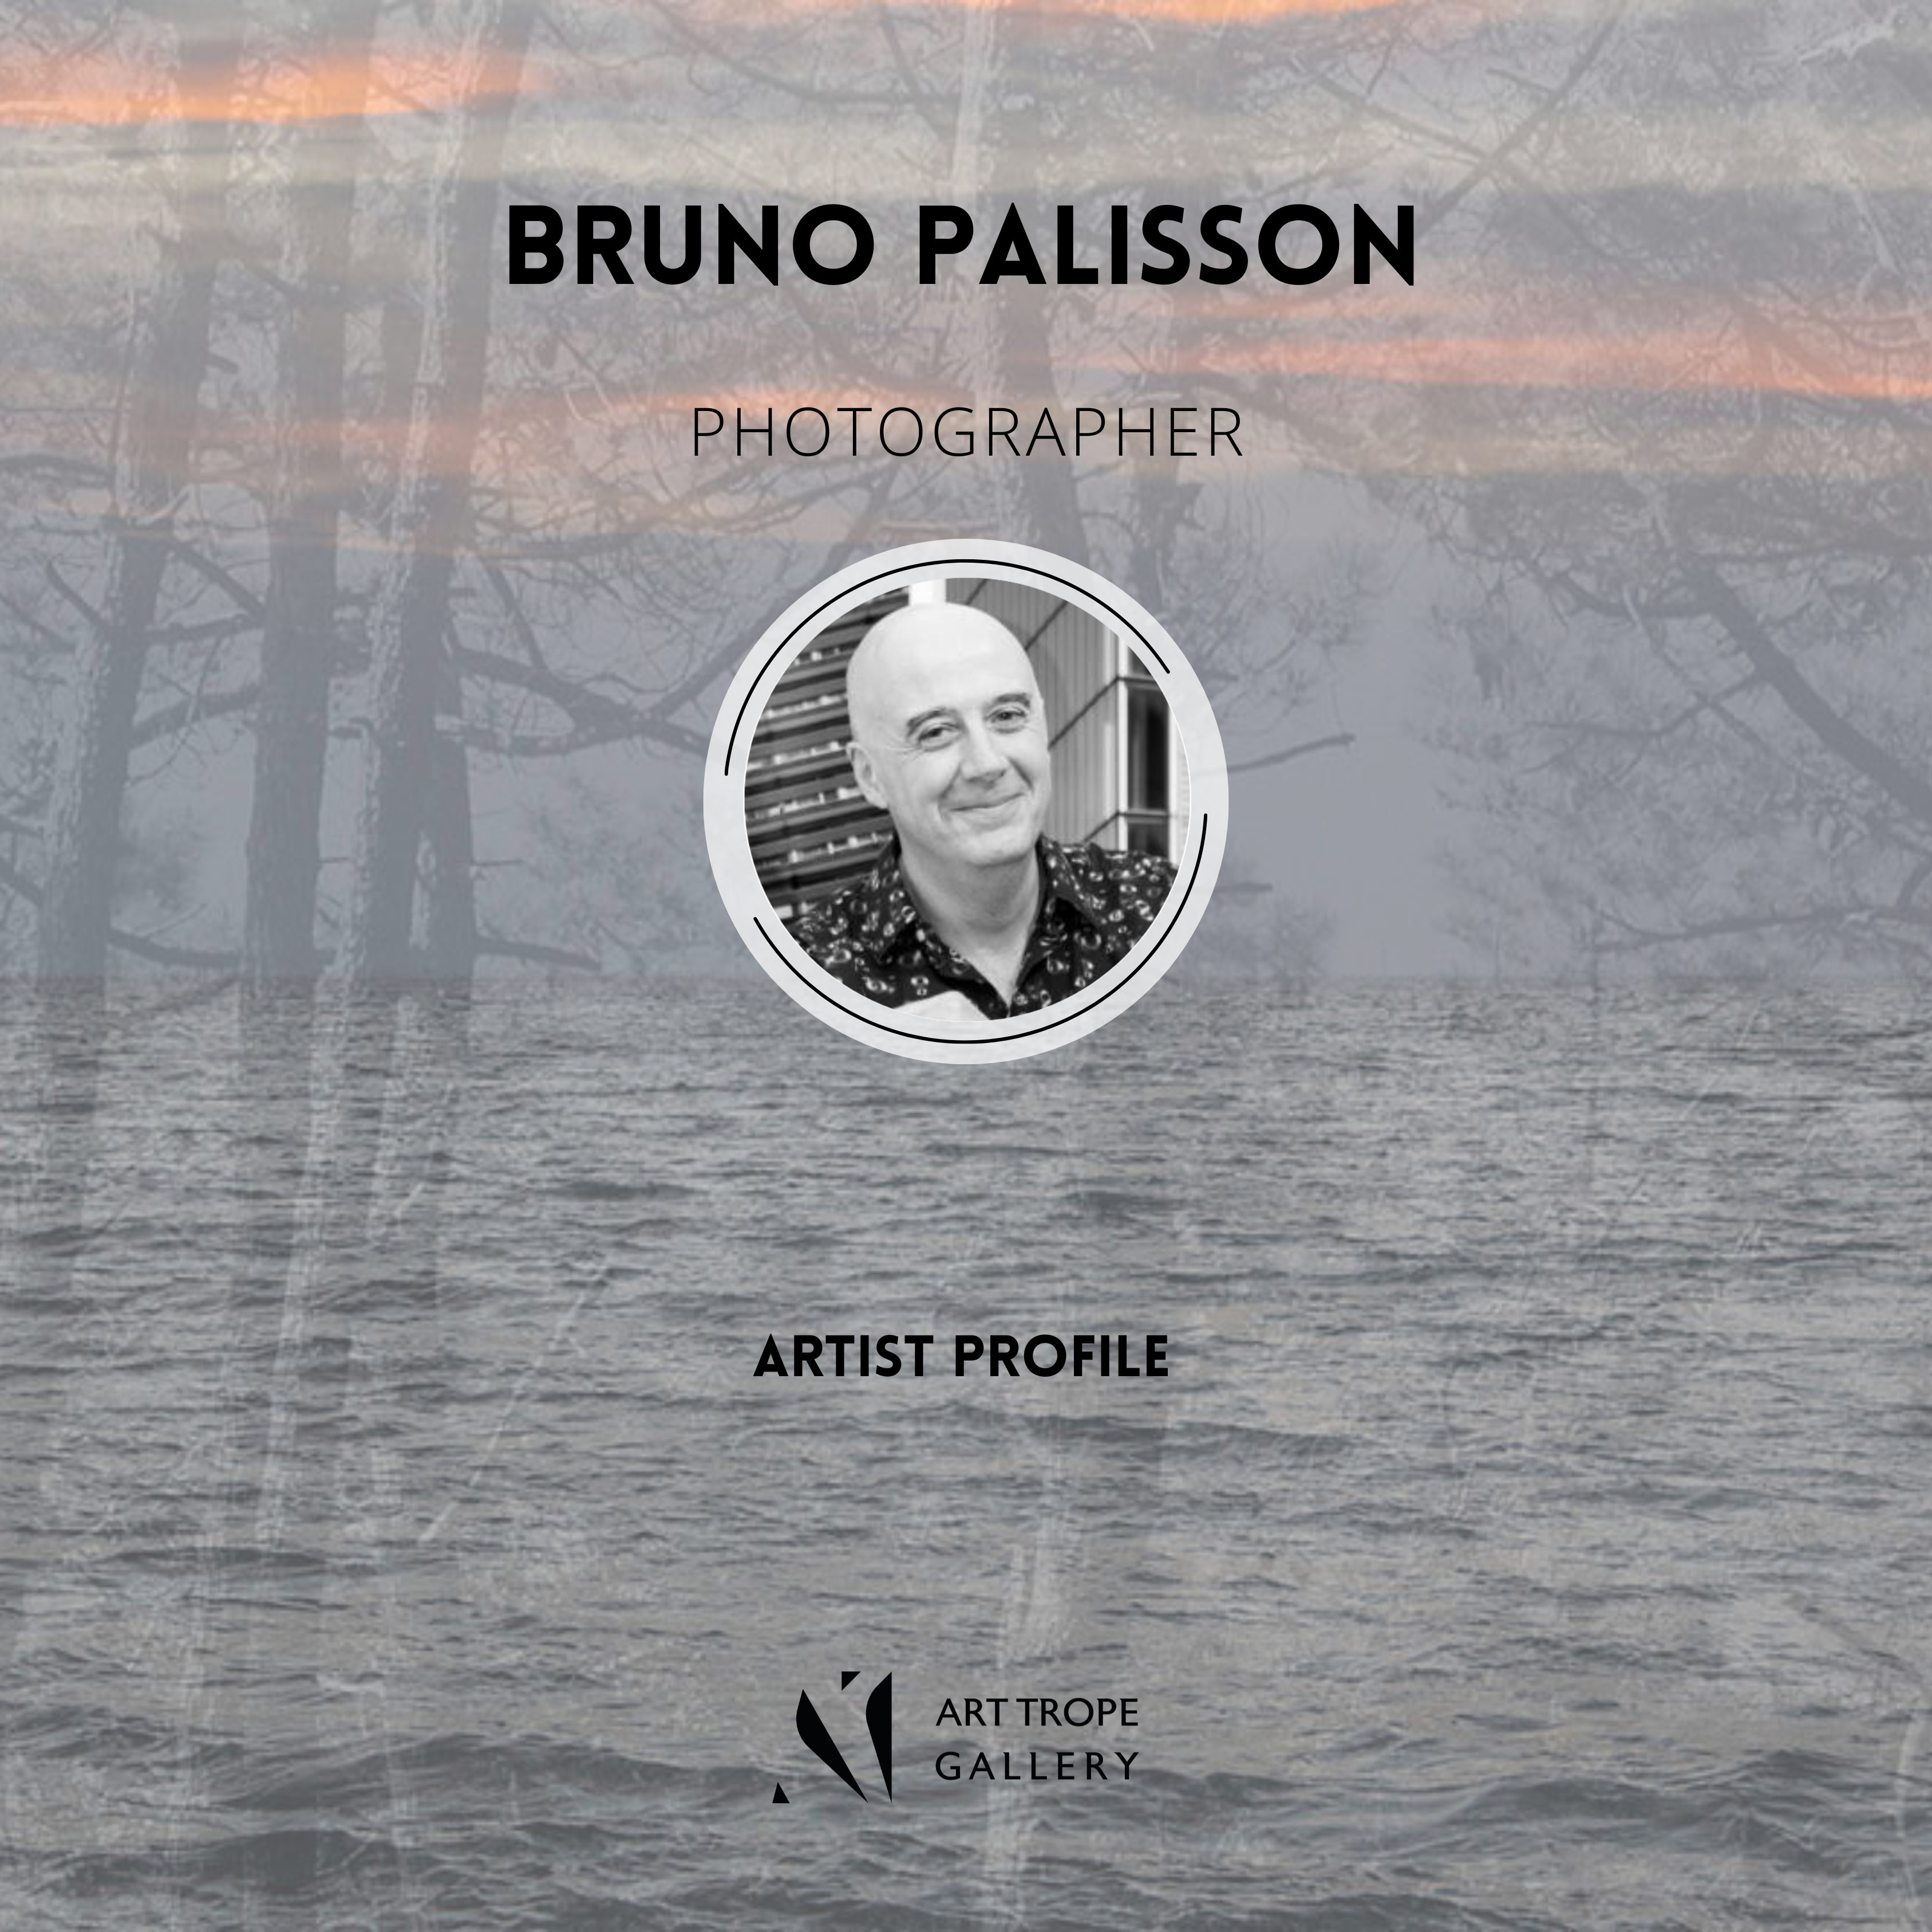 Art Trope Gallery features Photographer Bruno Palisson in a dedicated article!